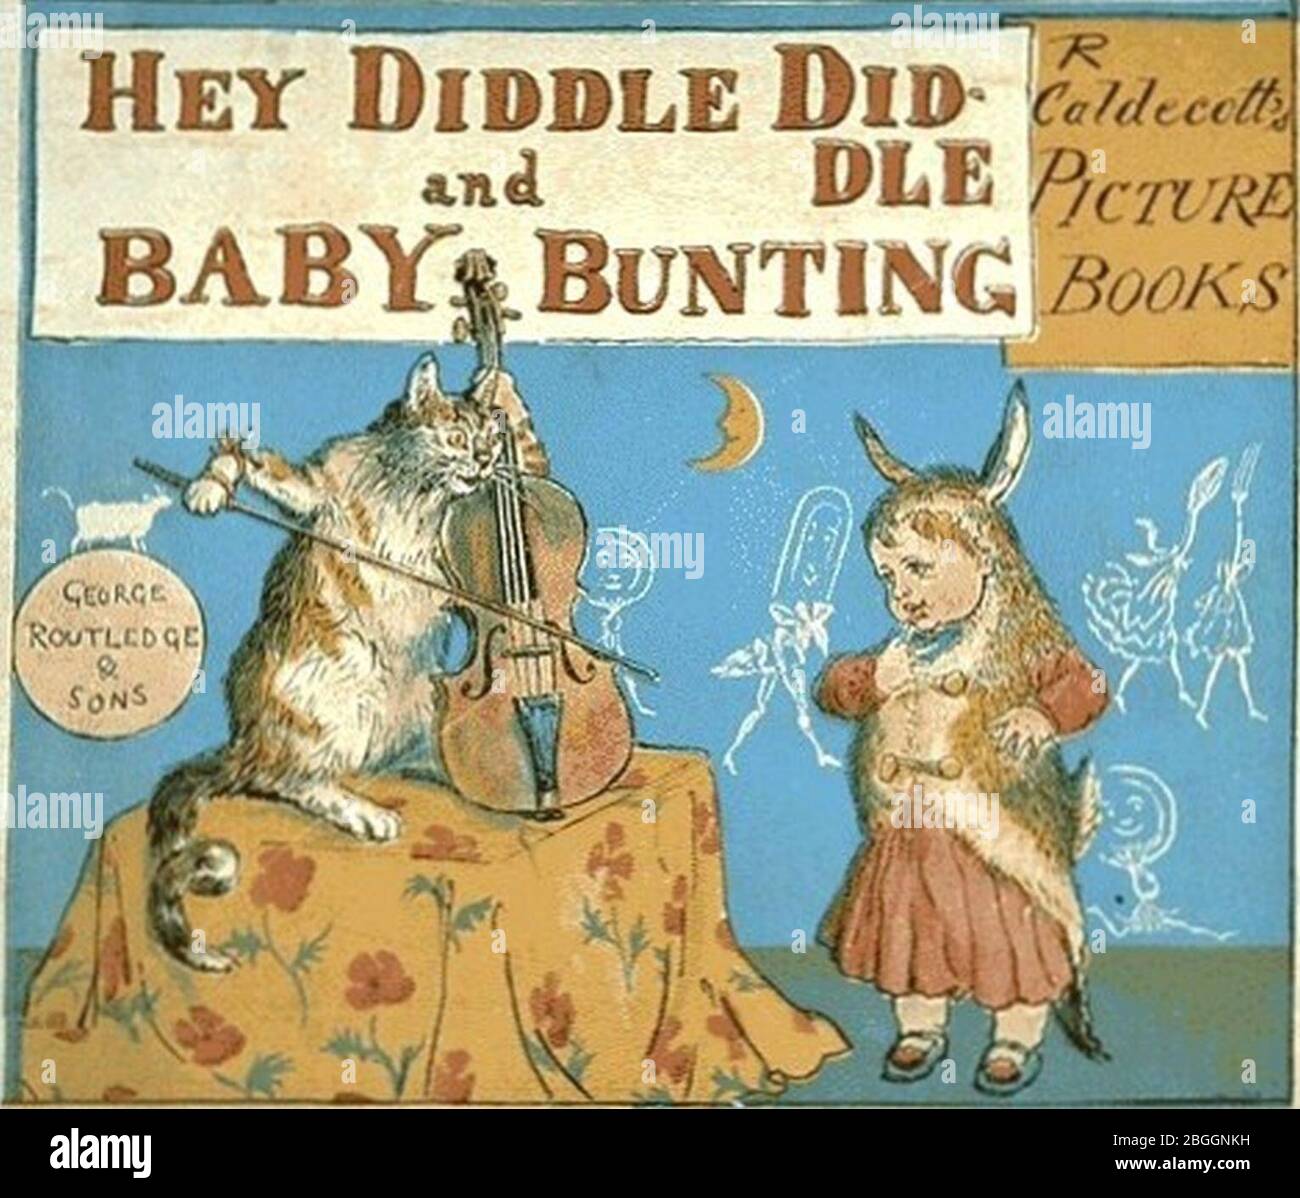 Hey diddle diddle and Baby bunting pg 1. Stock Photo